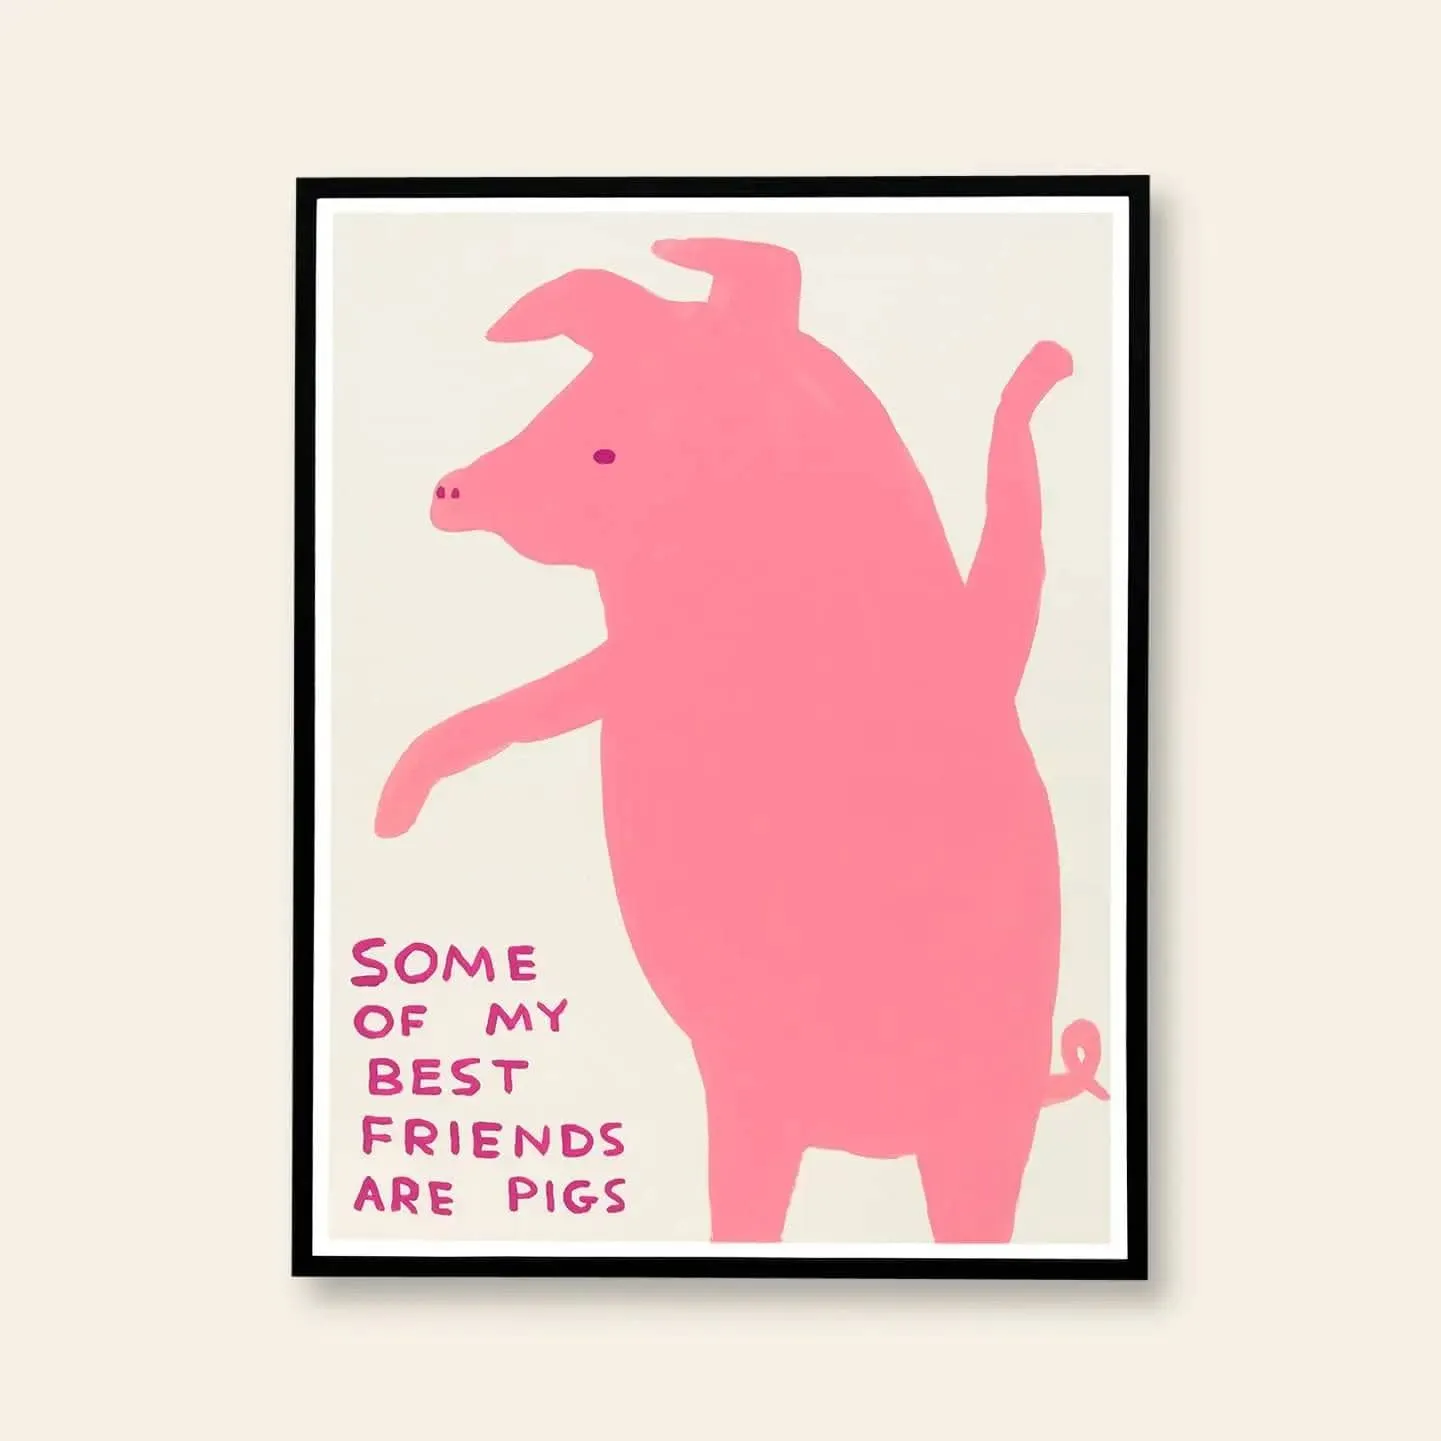 Shrig Shop David Shrigley Some Of My Best Friends Are Pigs 60x80 Poster 2